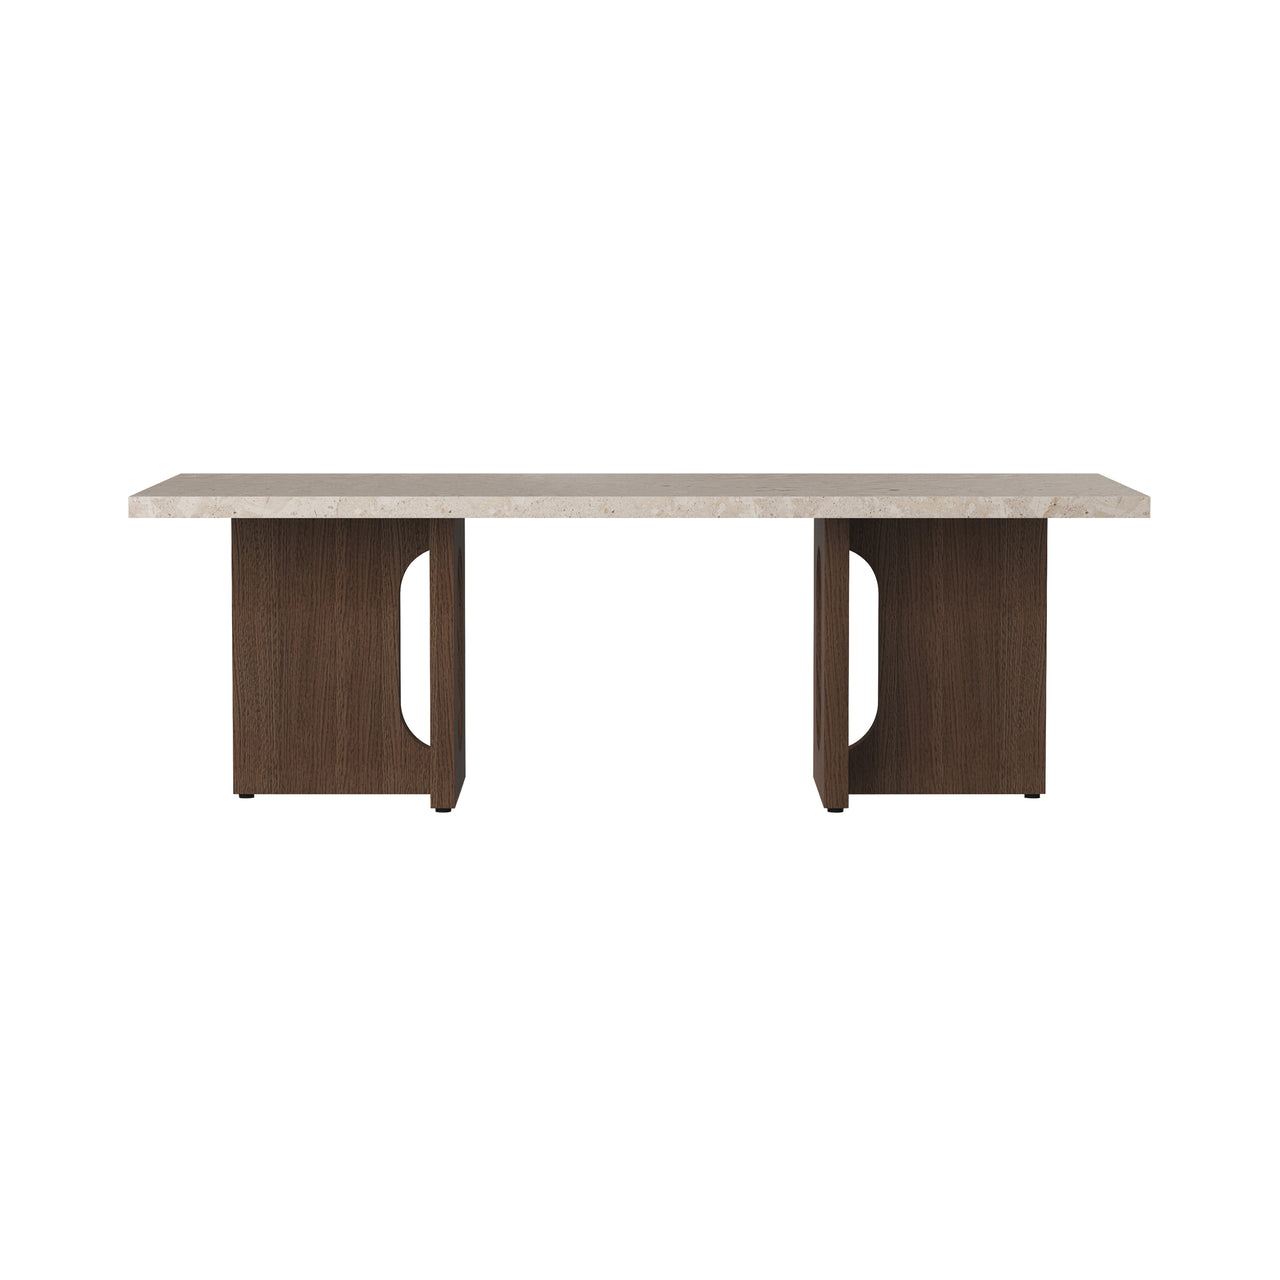 Androgyne Lounge Table: Kunis Breccia Sand Marble + Dark Stained Oak